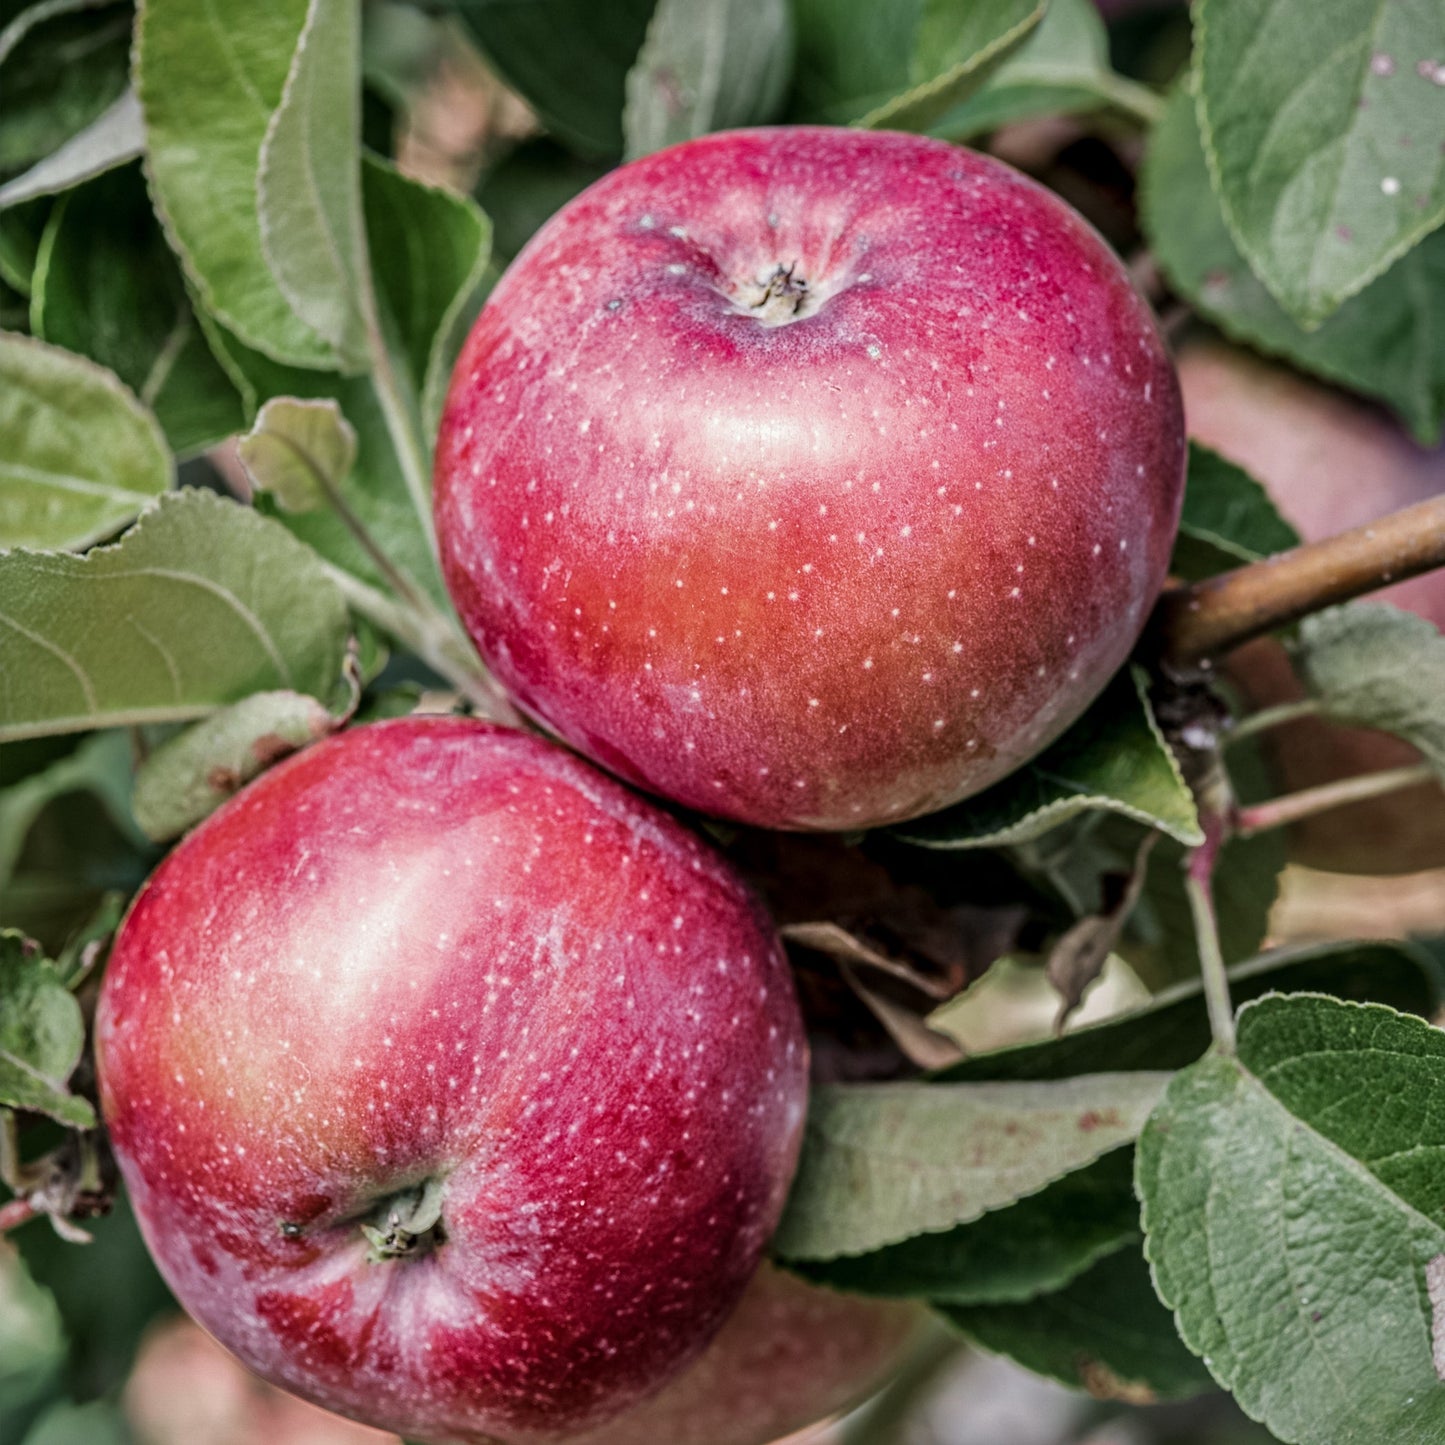 Close-up view of two Spartan red apples. 